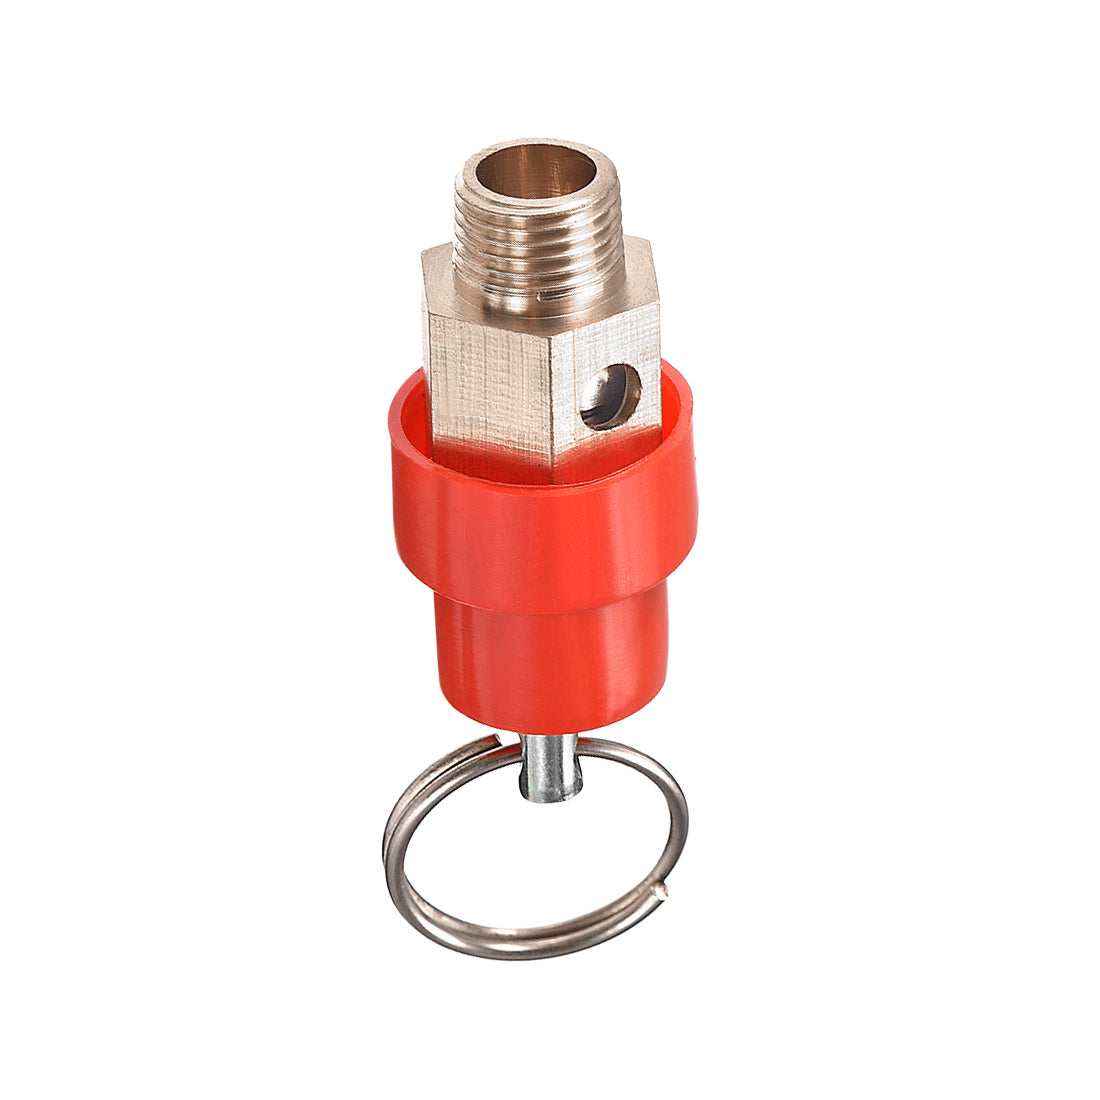 uxcell Uxcell Air Compressor Pressure Relief Valve Release G 1/8 Male Threaded 115 PSI Set Pressure Red Hat